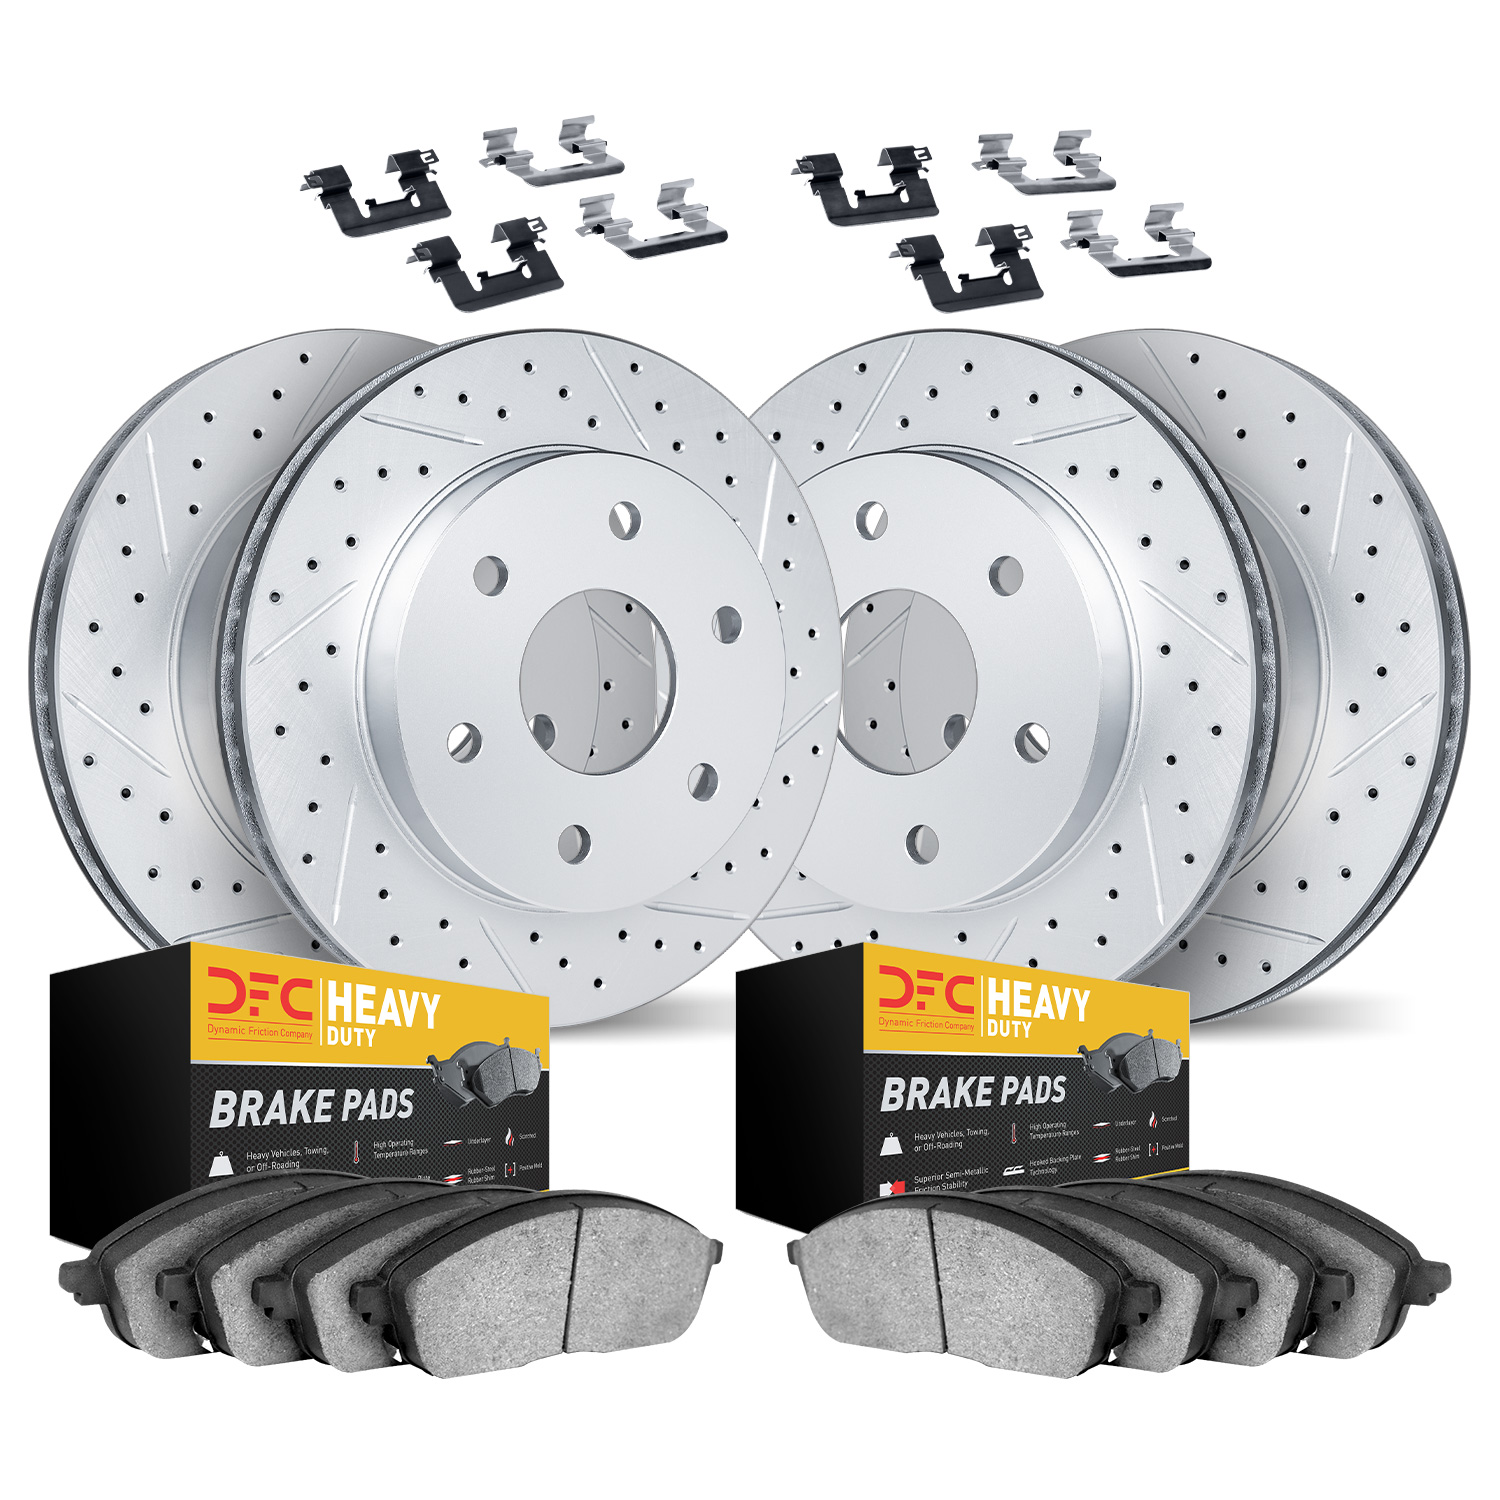 2214-99092 Geoperformance Drilled/Slotted Rotors w/Heavy-Duty Pads Kit & Hardware, 2018-2021 Ford/Lincoln/Mercury/Mazda, Positio